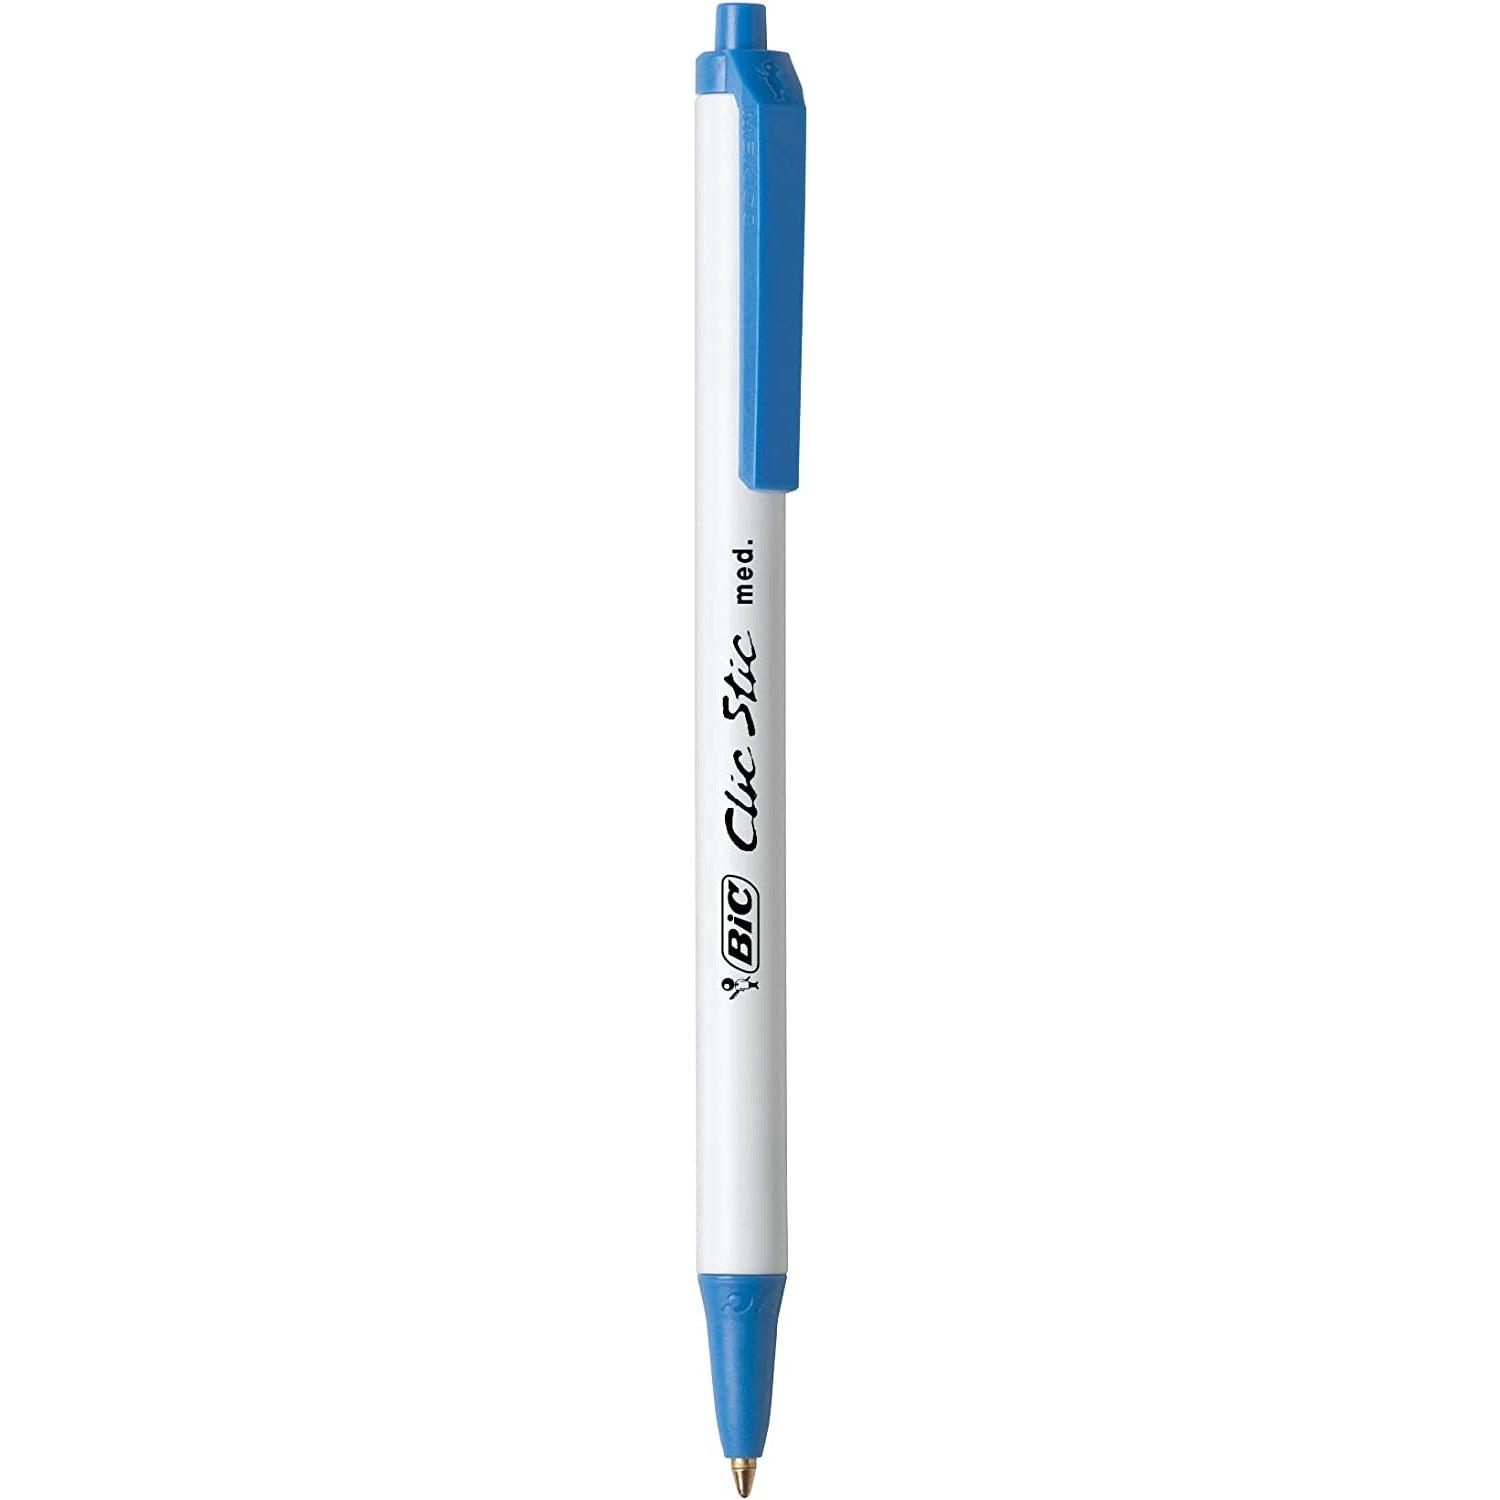 BIC Clic Stic Retractable Ball Pen, Medium Point (1.0mm), Blue, 12-Count - BumbleToys - 5-7 Years, Drawing & Painting, Pencil, Pre-Order, School Supplies, Stationery & Stickers